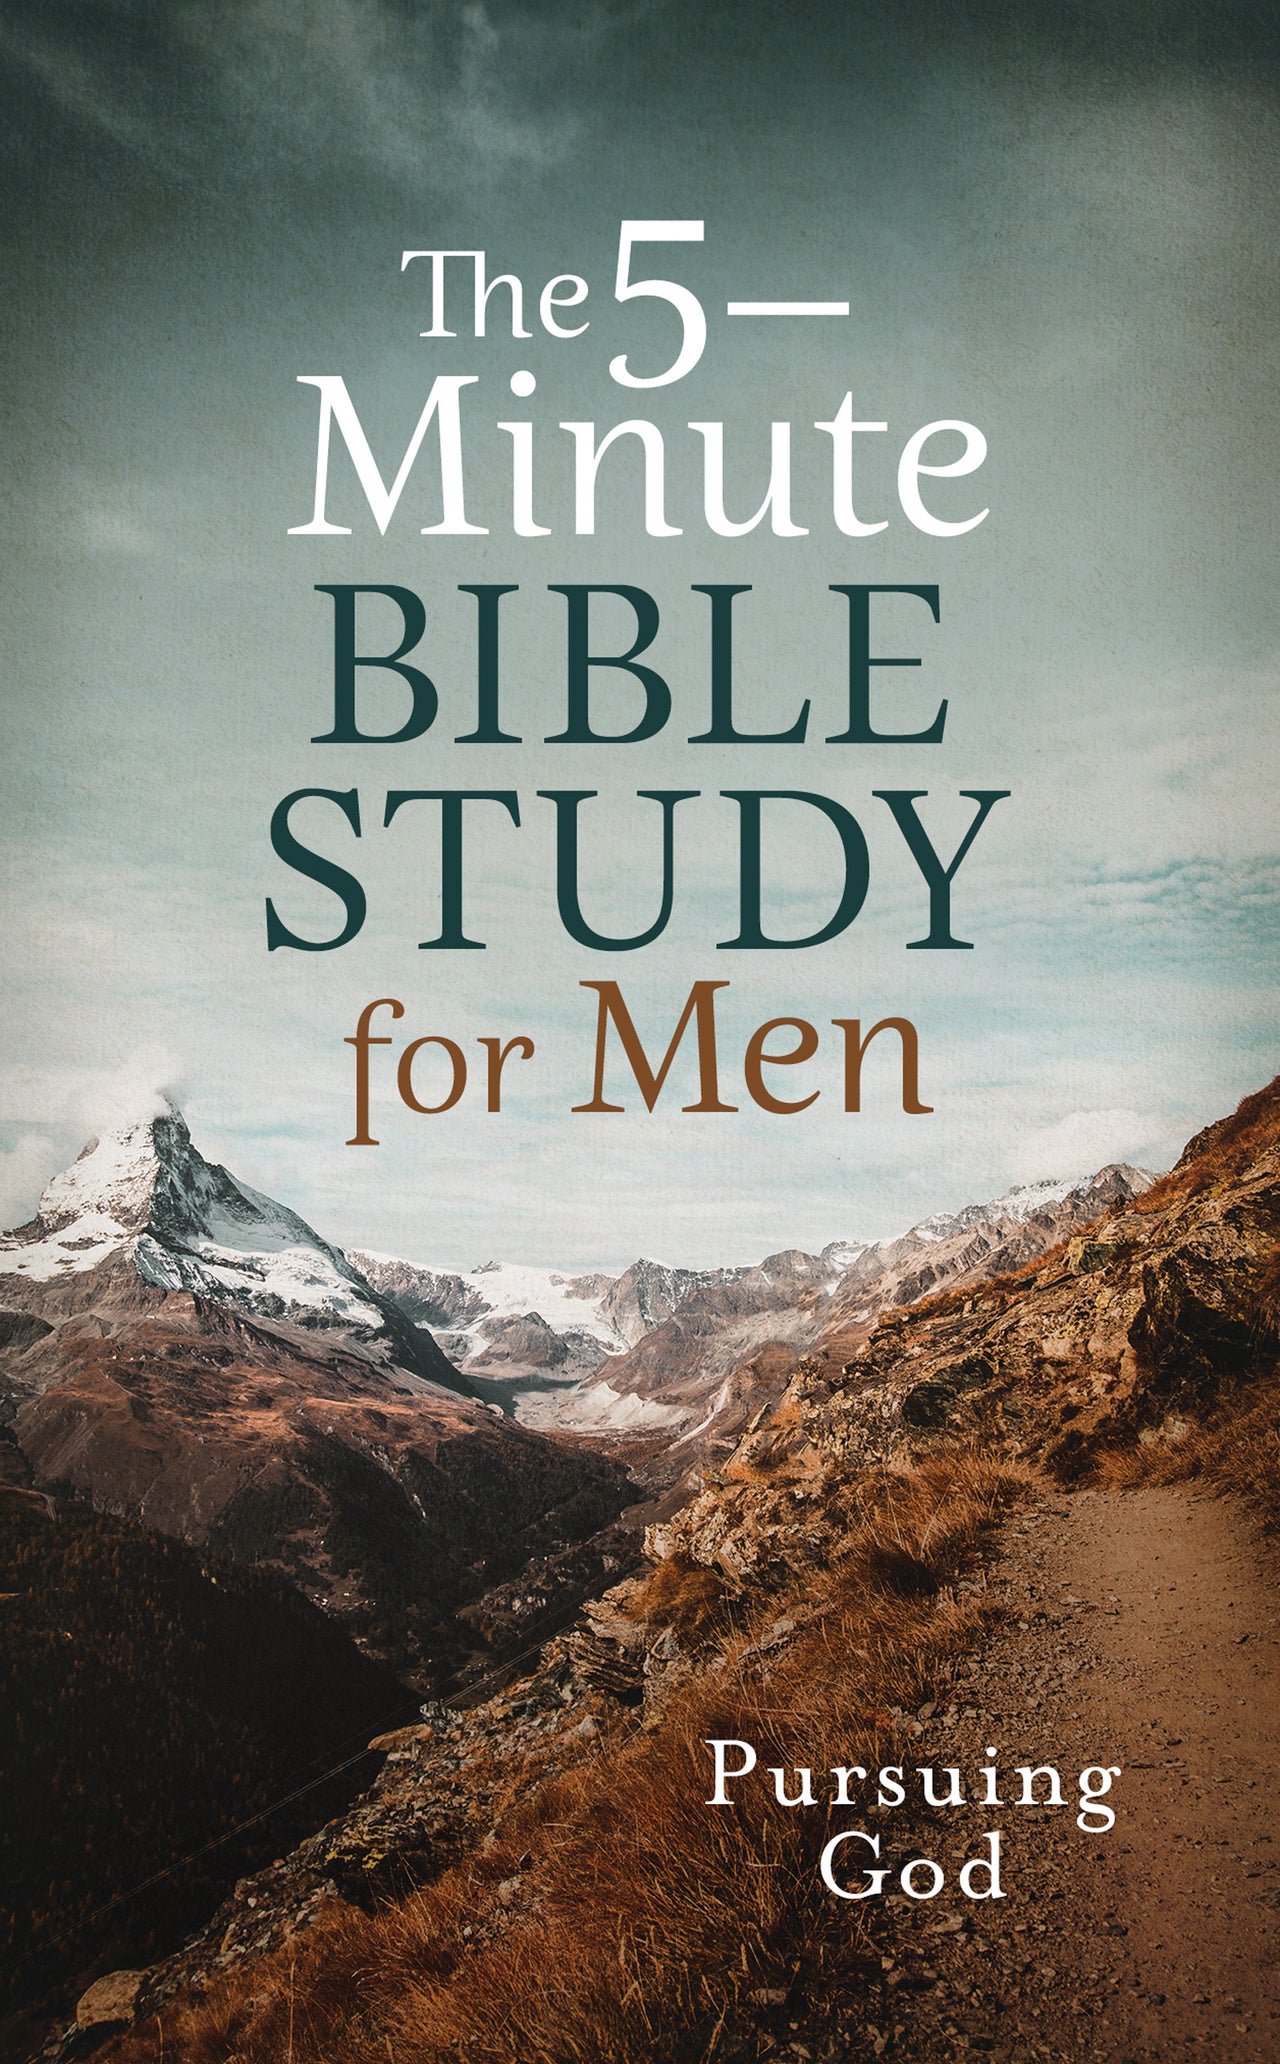 The 5-Minute Bible Study for Men: Pursuing God - Mercantile Mountain